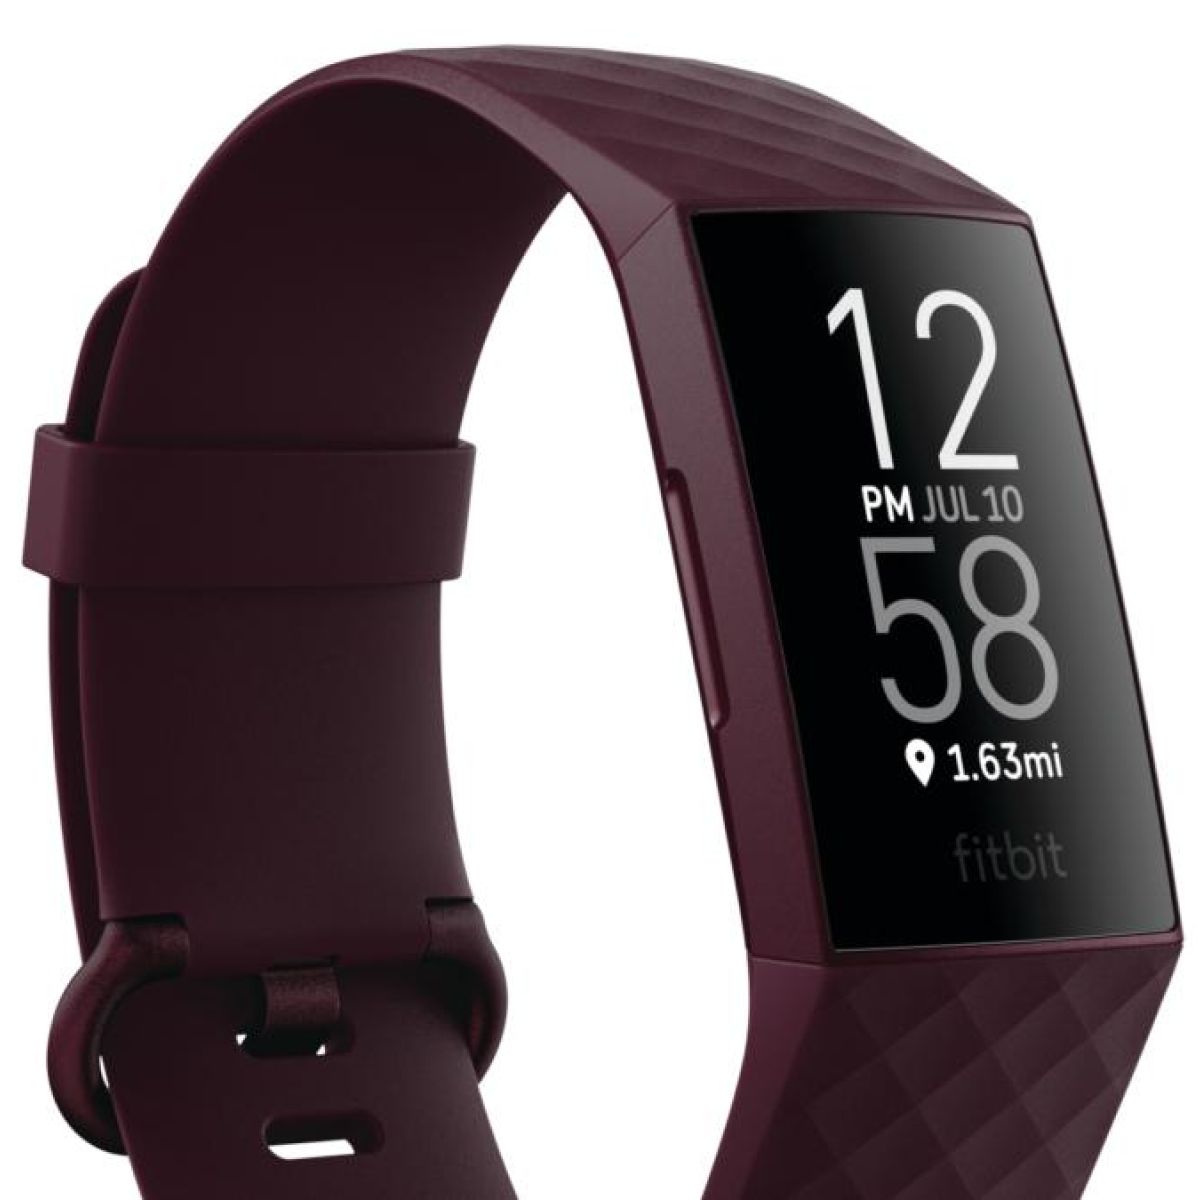 do fitbit watches have gps